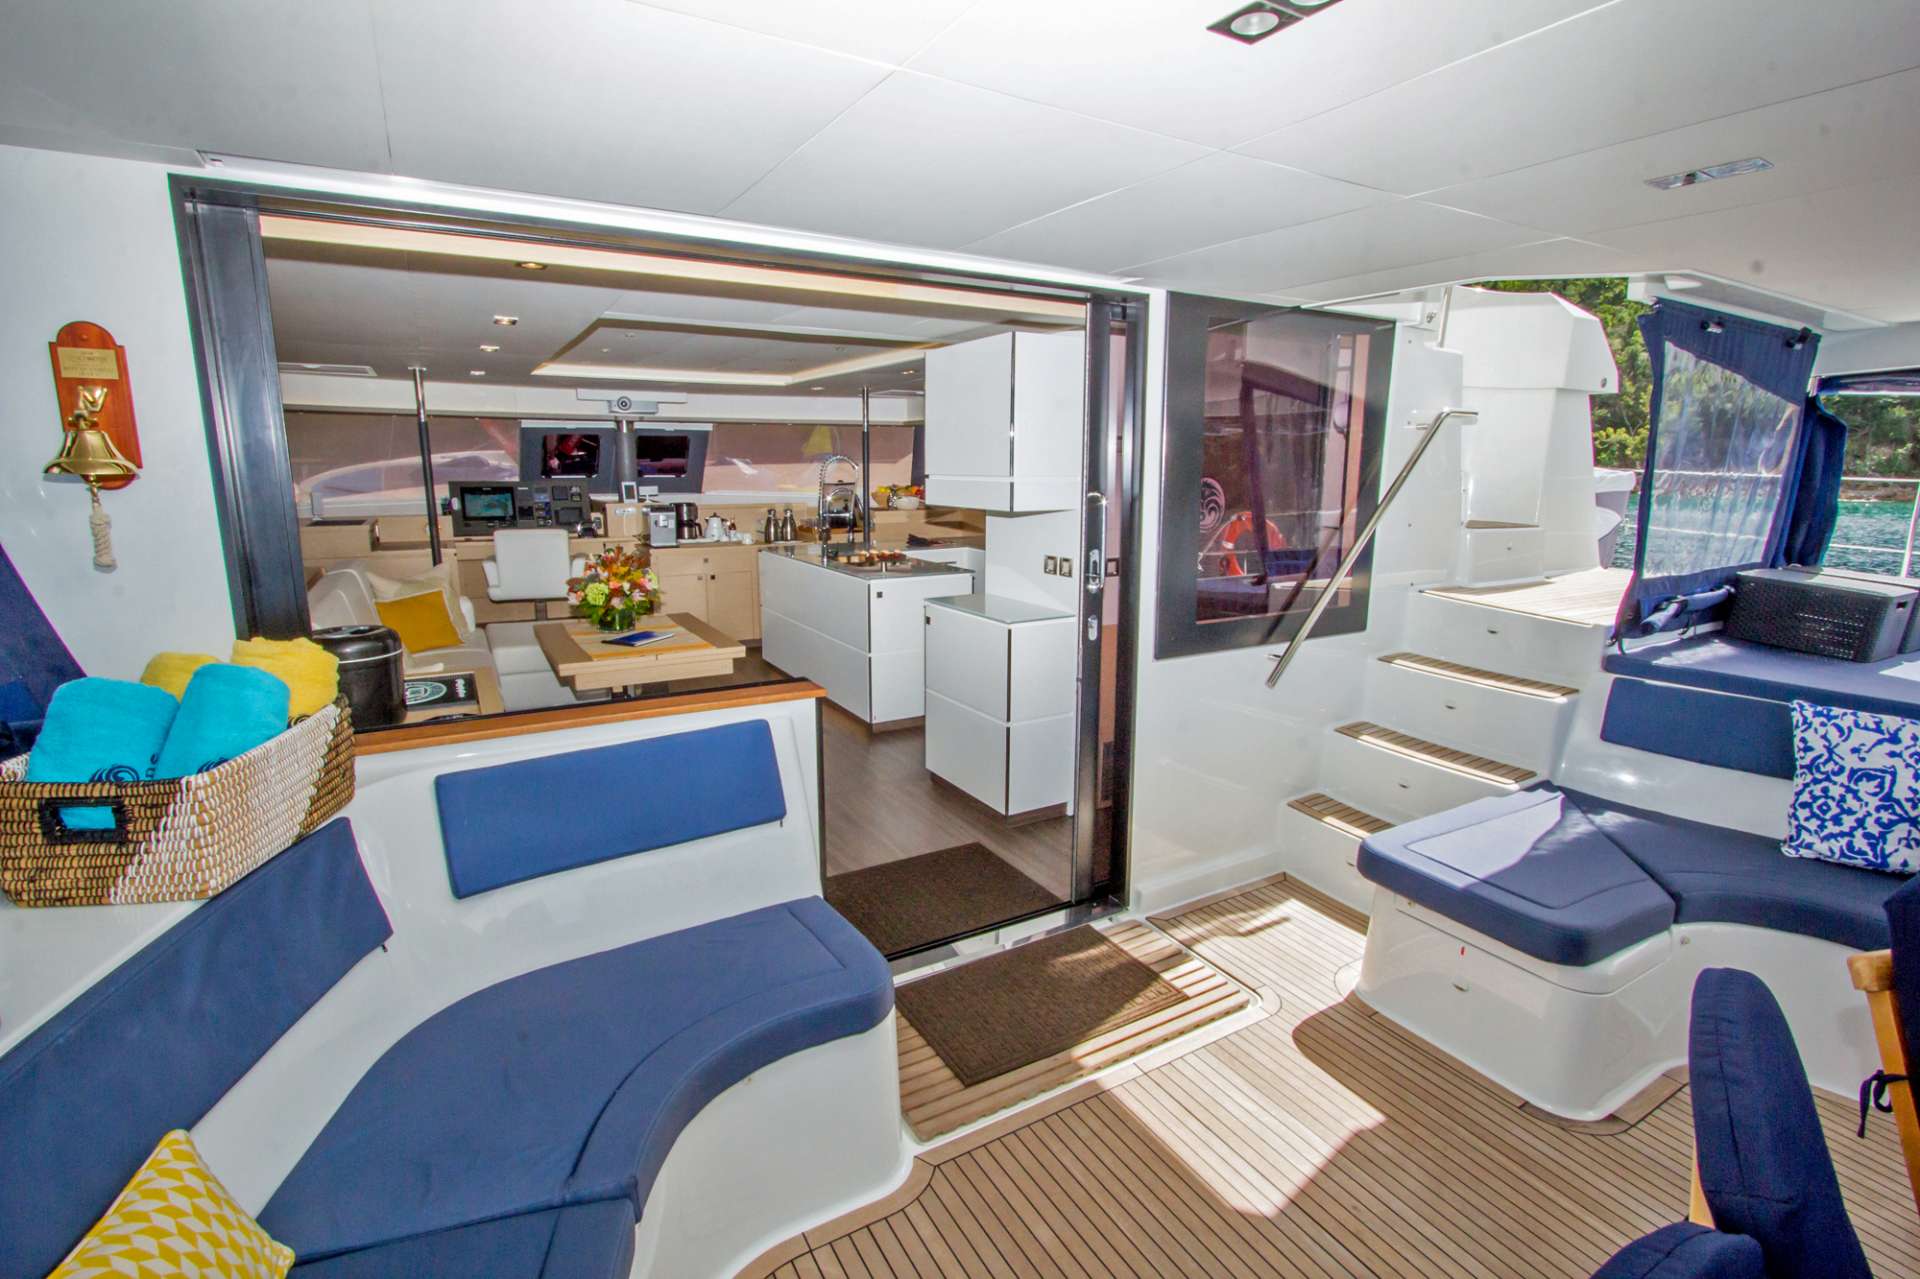 Catamaran Yacht 'NENNE' Spacious Aft Deck and Salon Entrance, 10 PAX, 3 Crew, 67.00 Ft, 20.00 Meters, Built 2017, Fountaine-Pajot, Refit Year The latest, 2020 electronics and equipment onboard. New larger tender June 2019